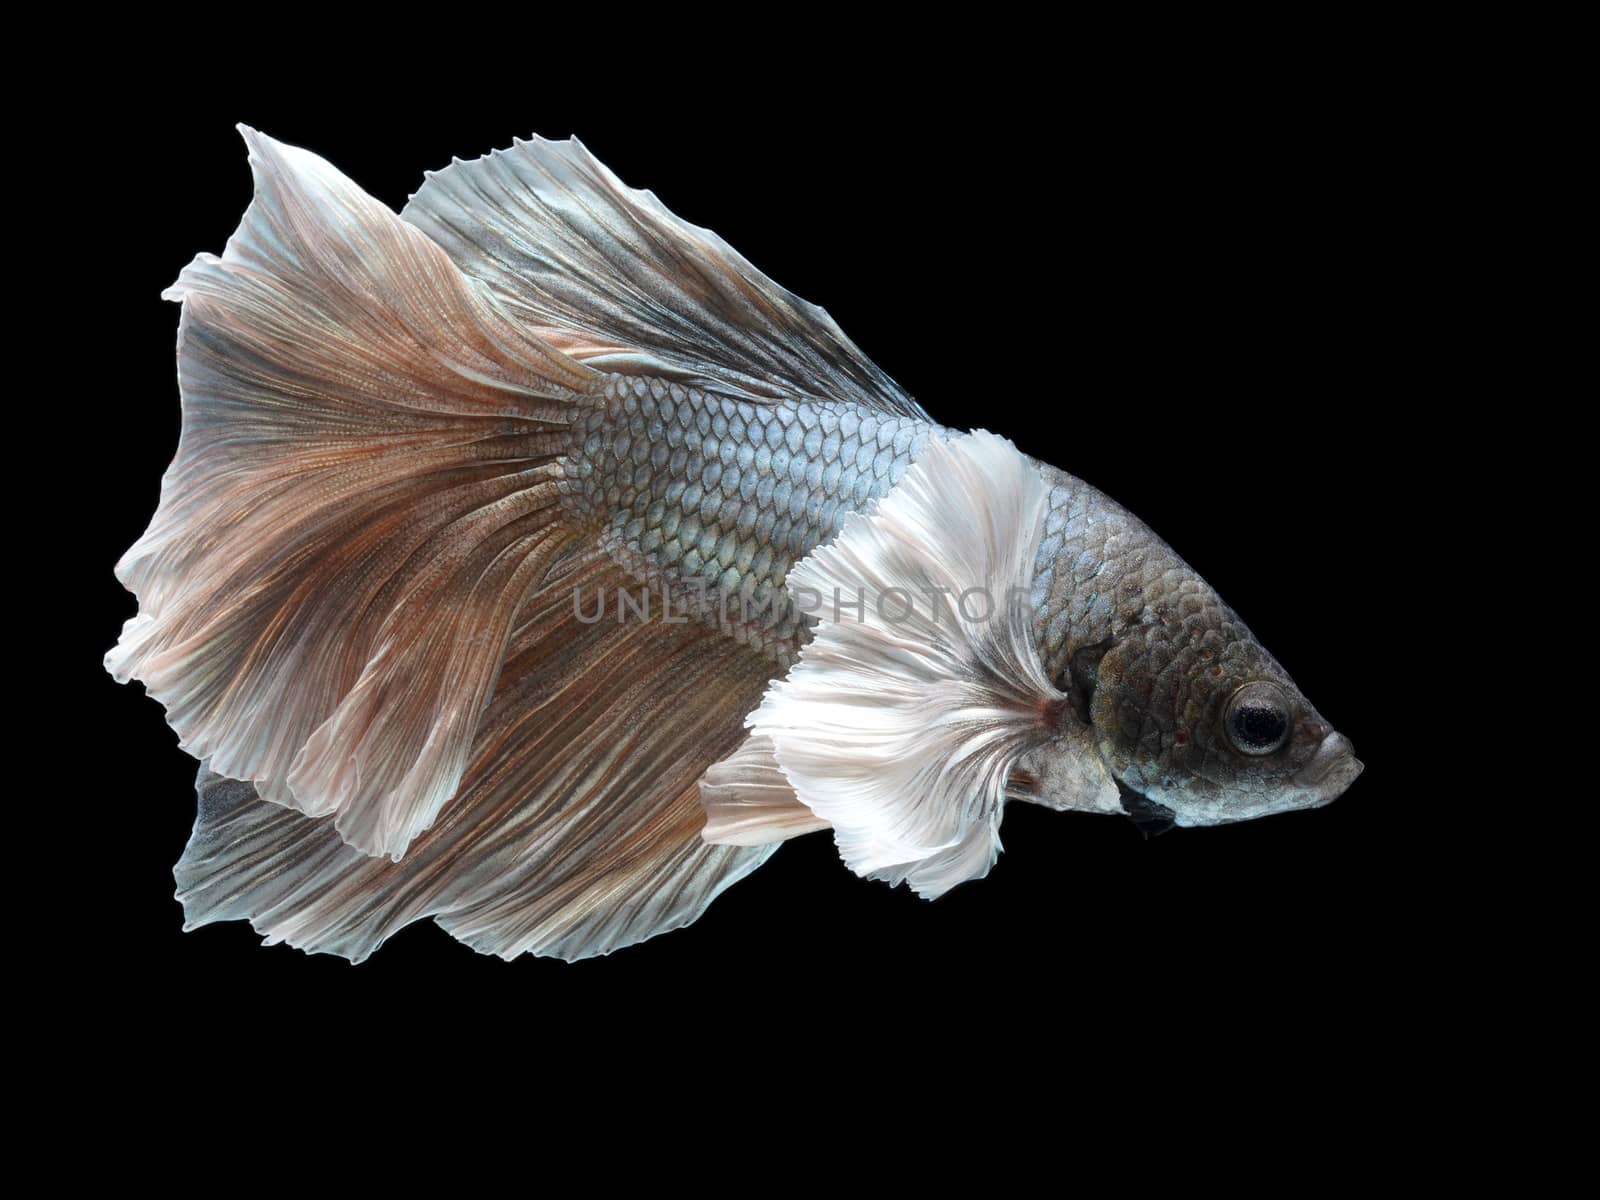 Male Halfmoon Betta on black background. Siamese fighting fish is the freshwater fish with beautiful fins and color.